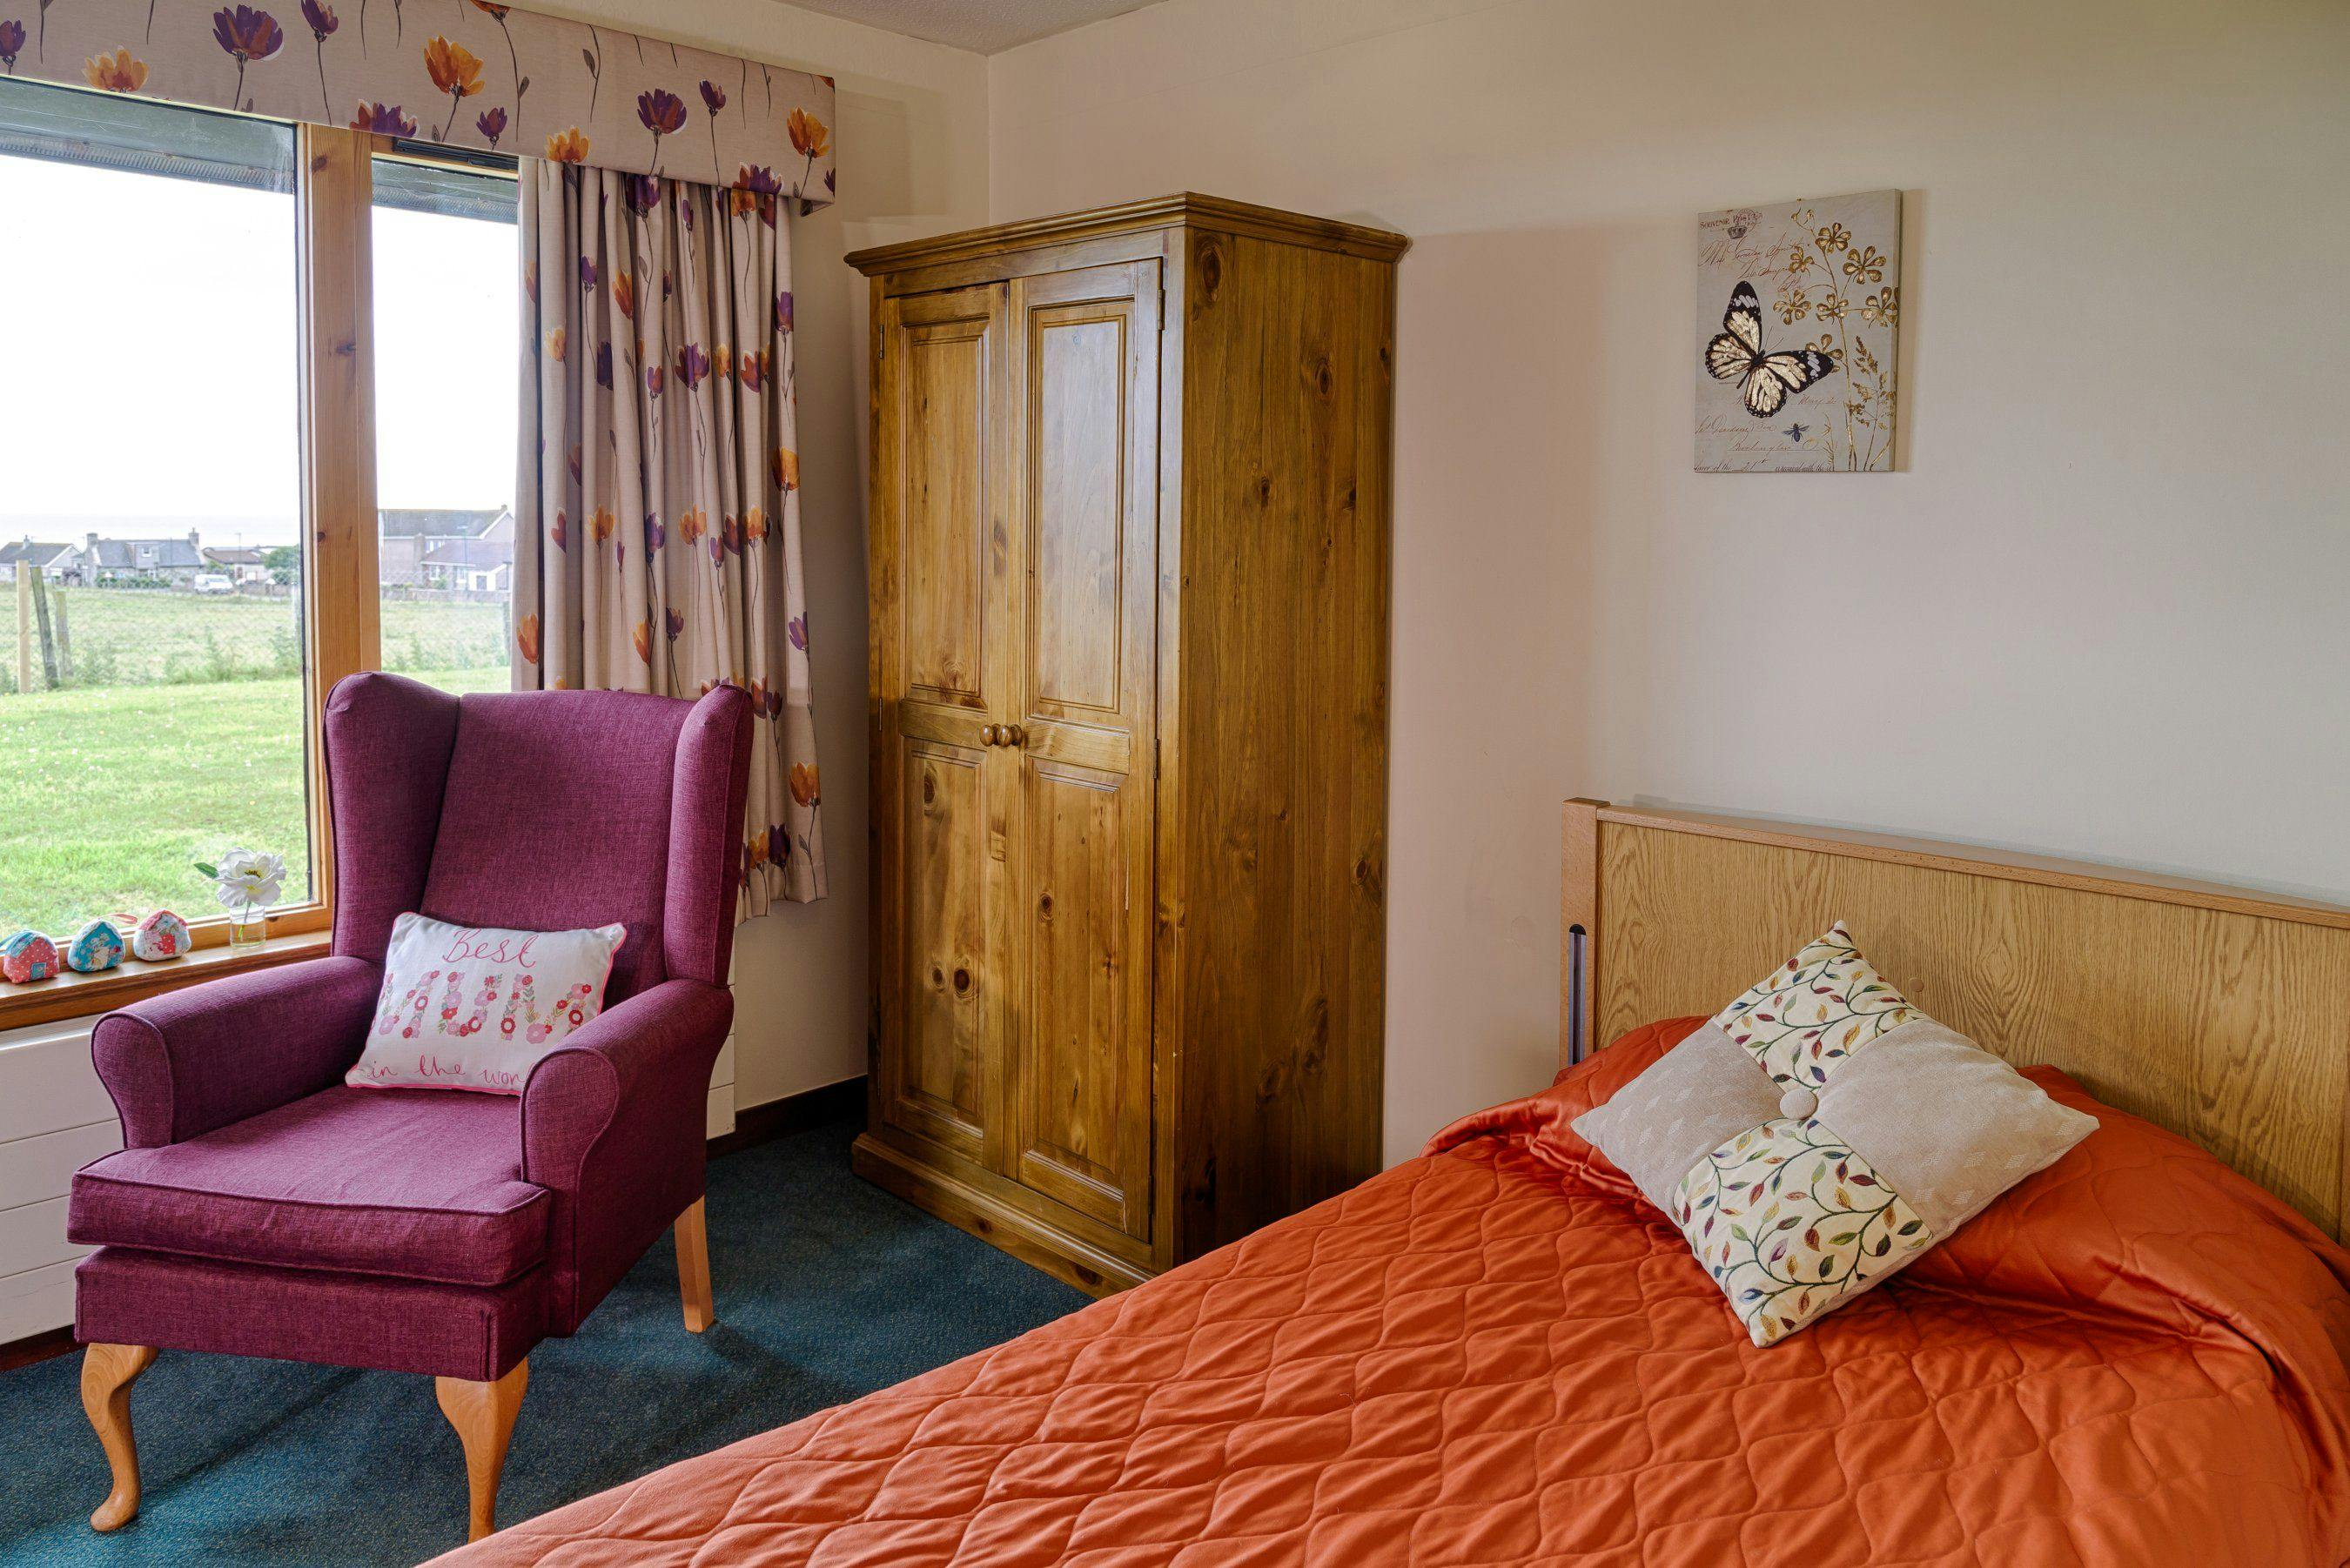 Bedroom at Seaview Care Home in Wick, Highland